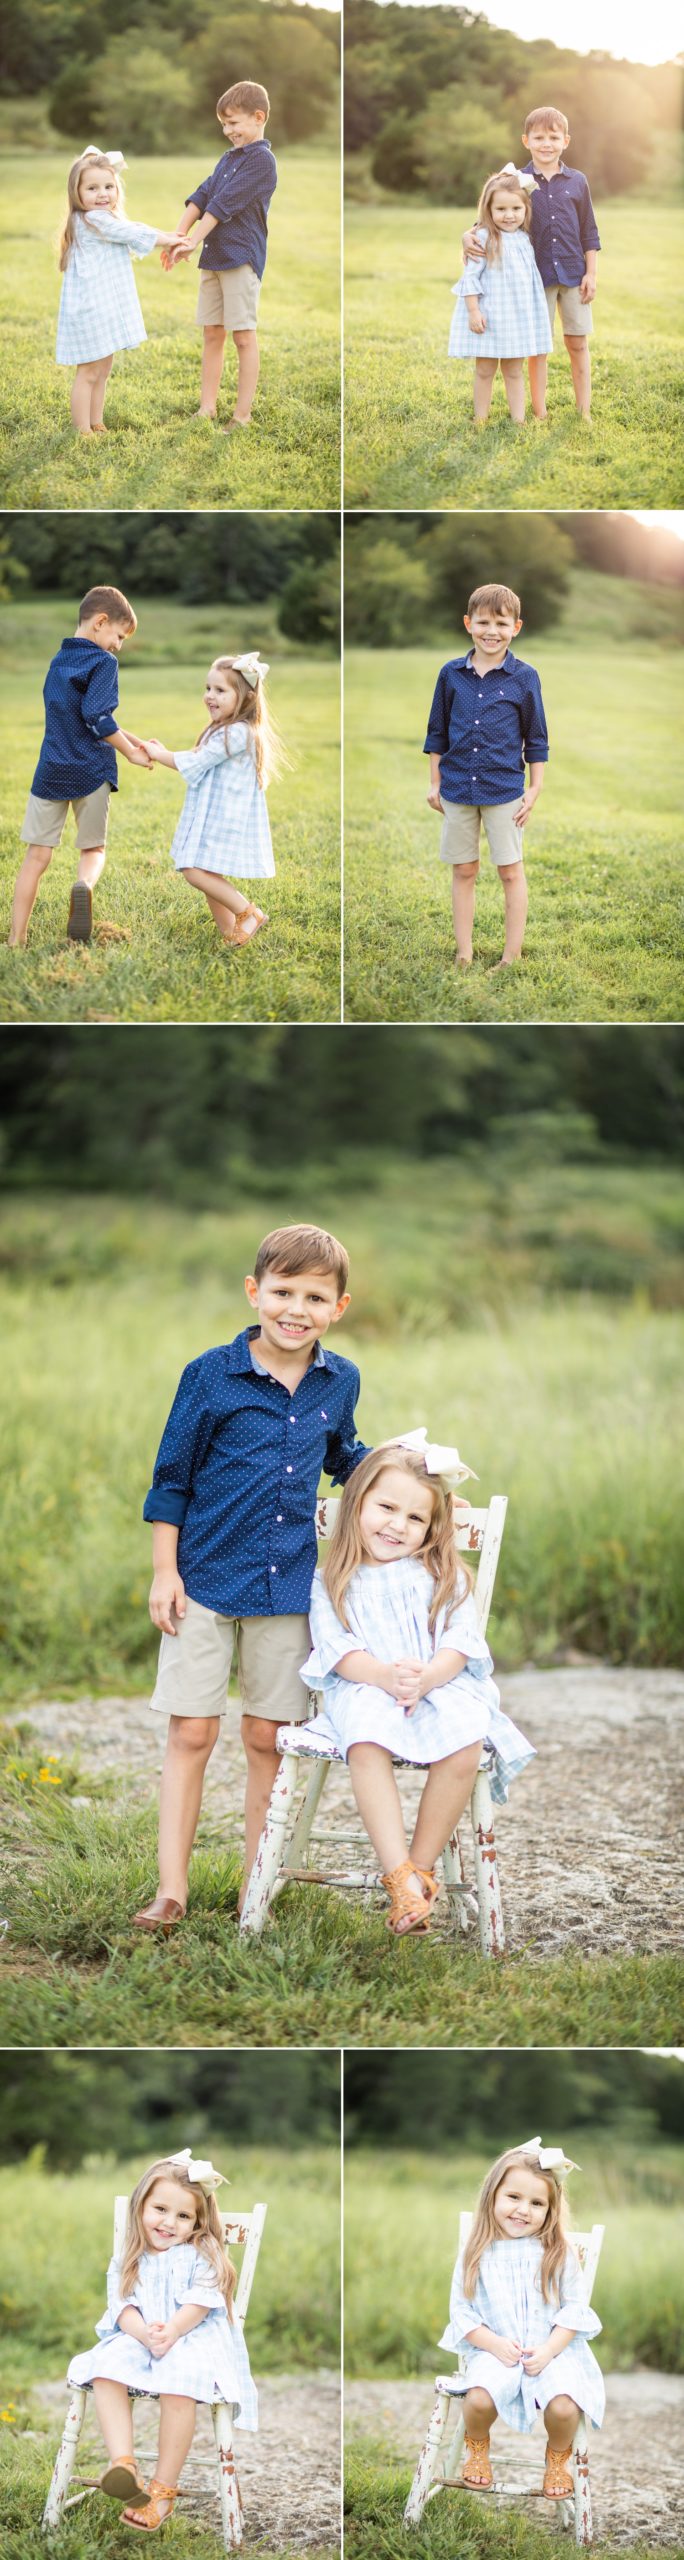 Family portrait photography mini session at Ravenswood Mansion, Brentwood, TN